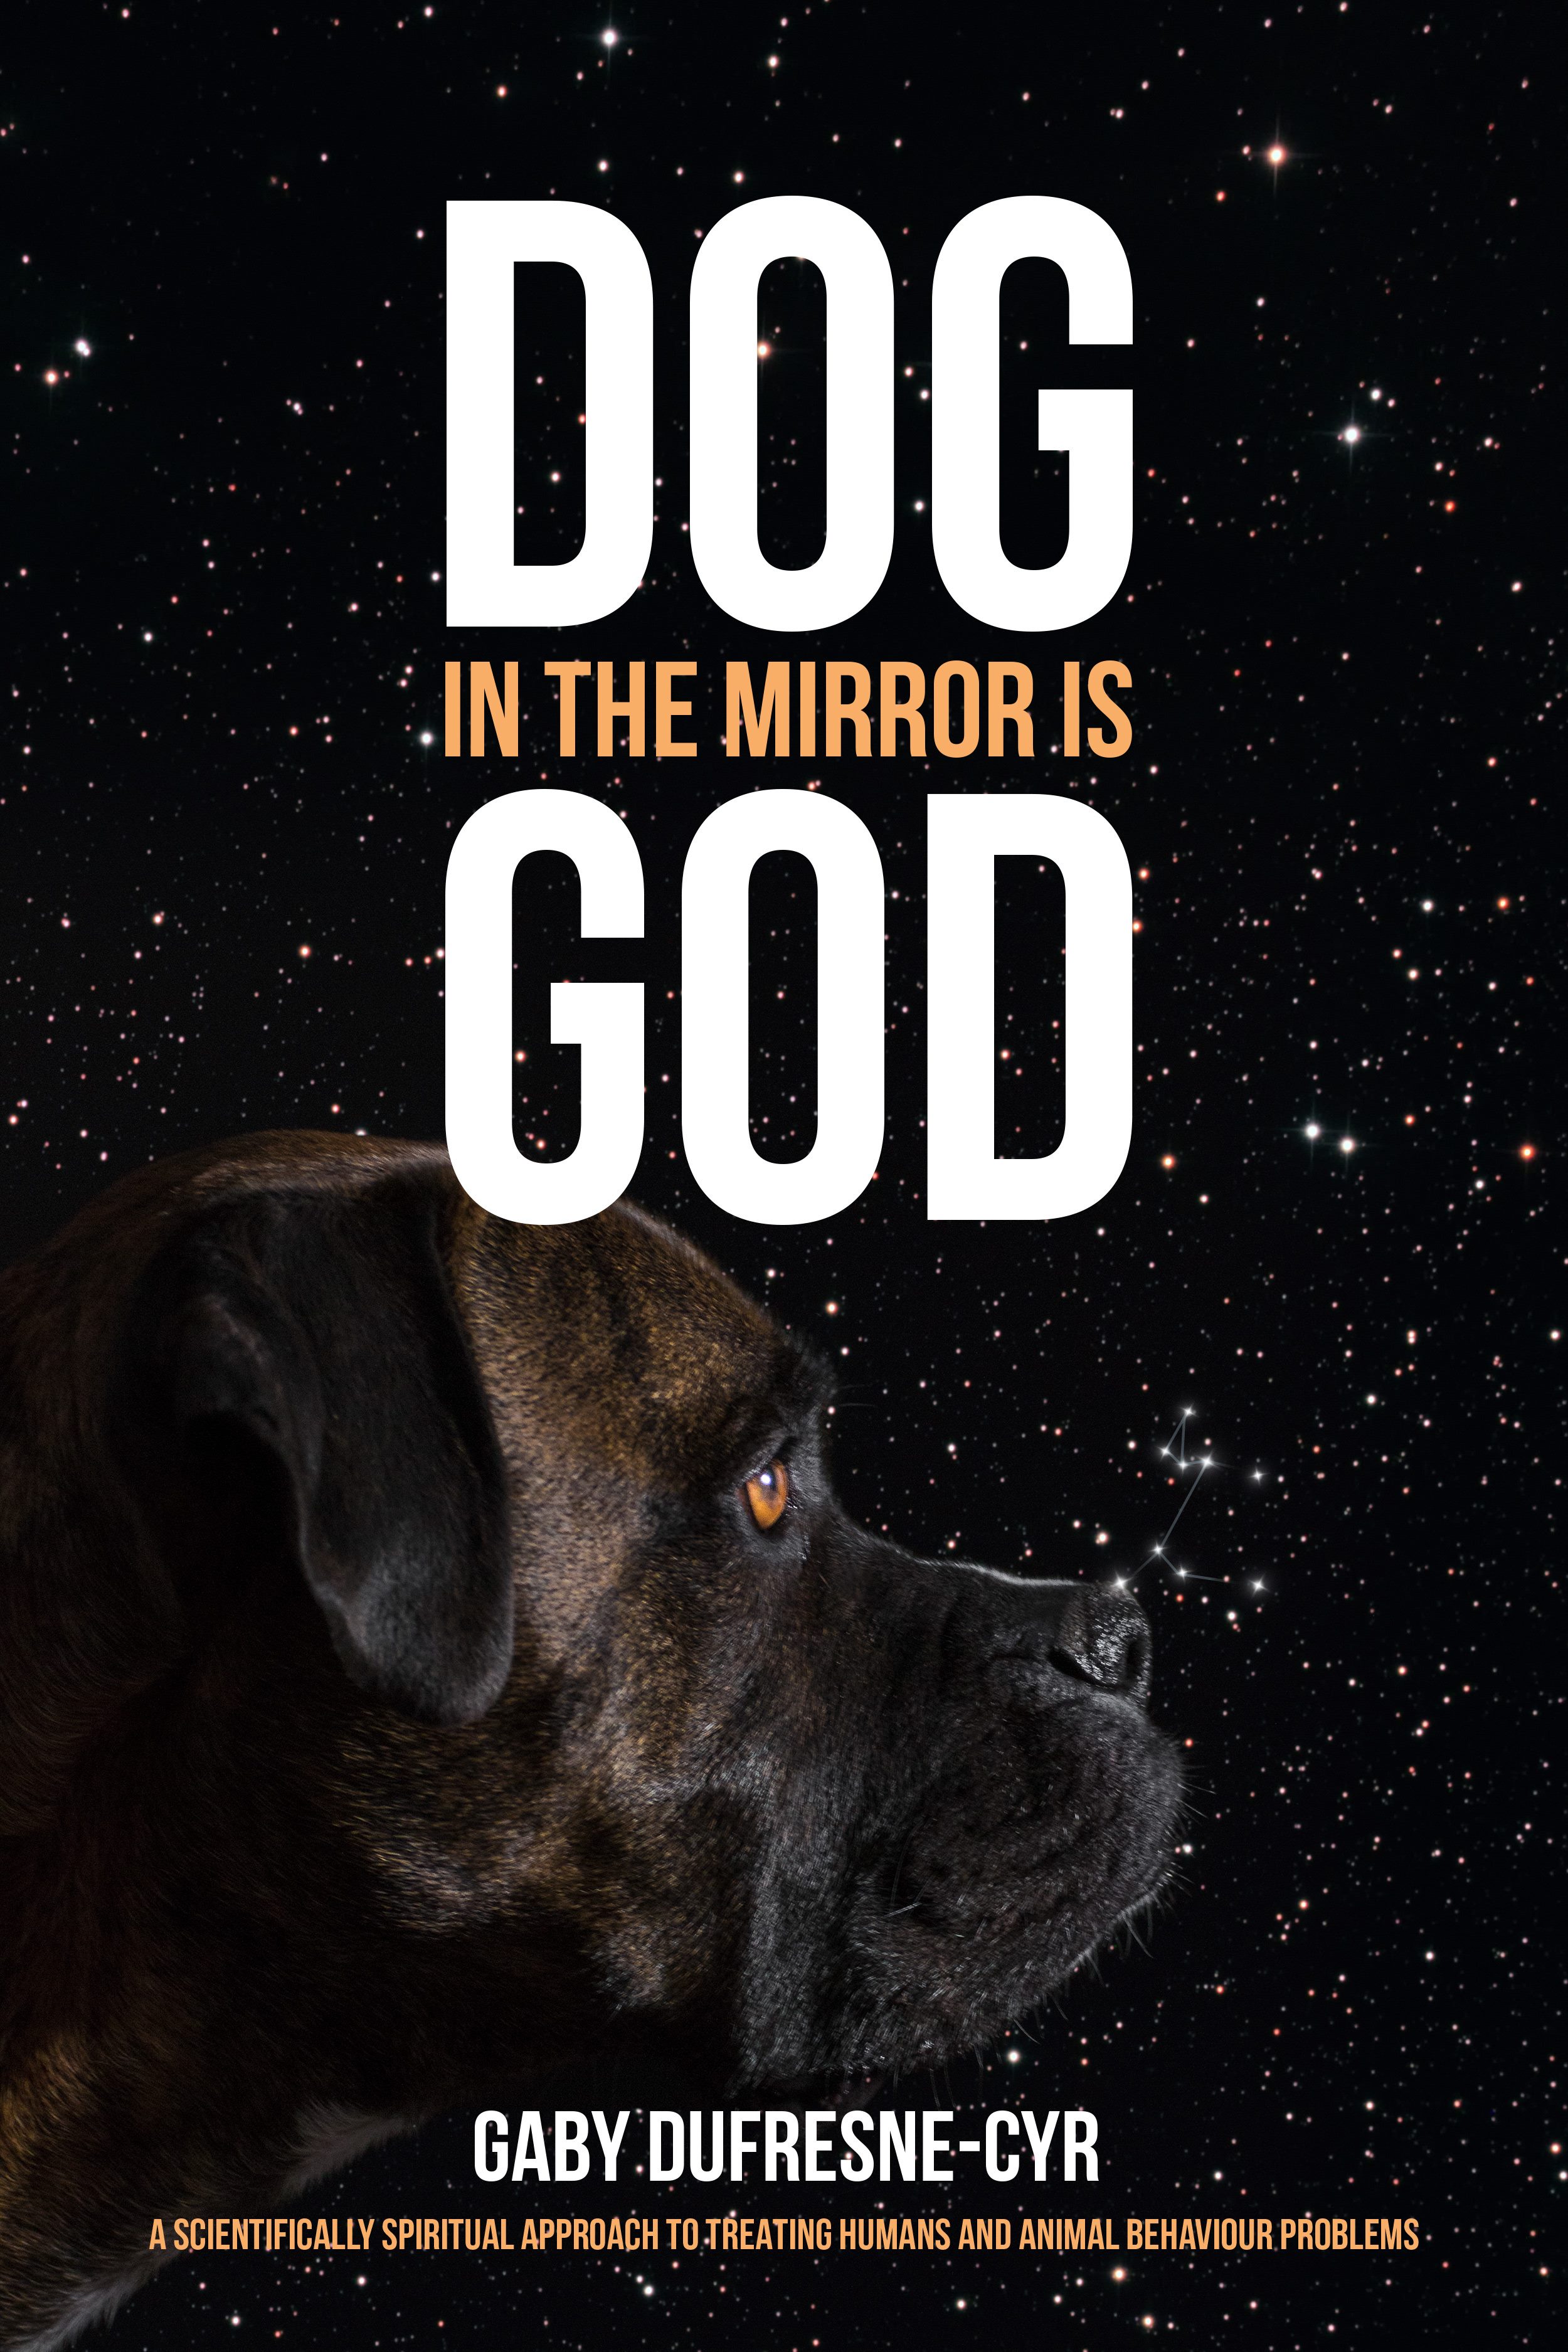 Dog in the mirror book cover